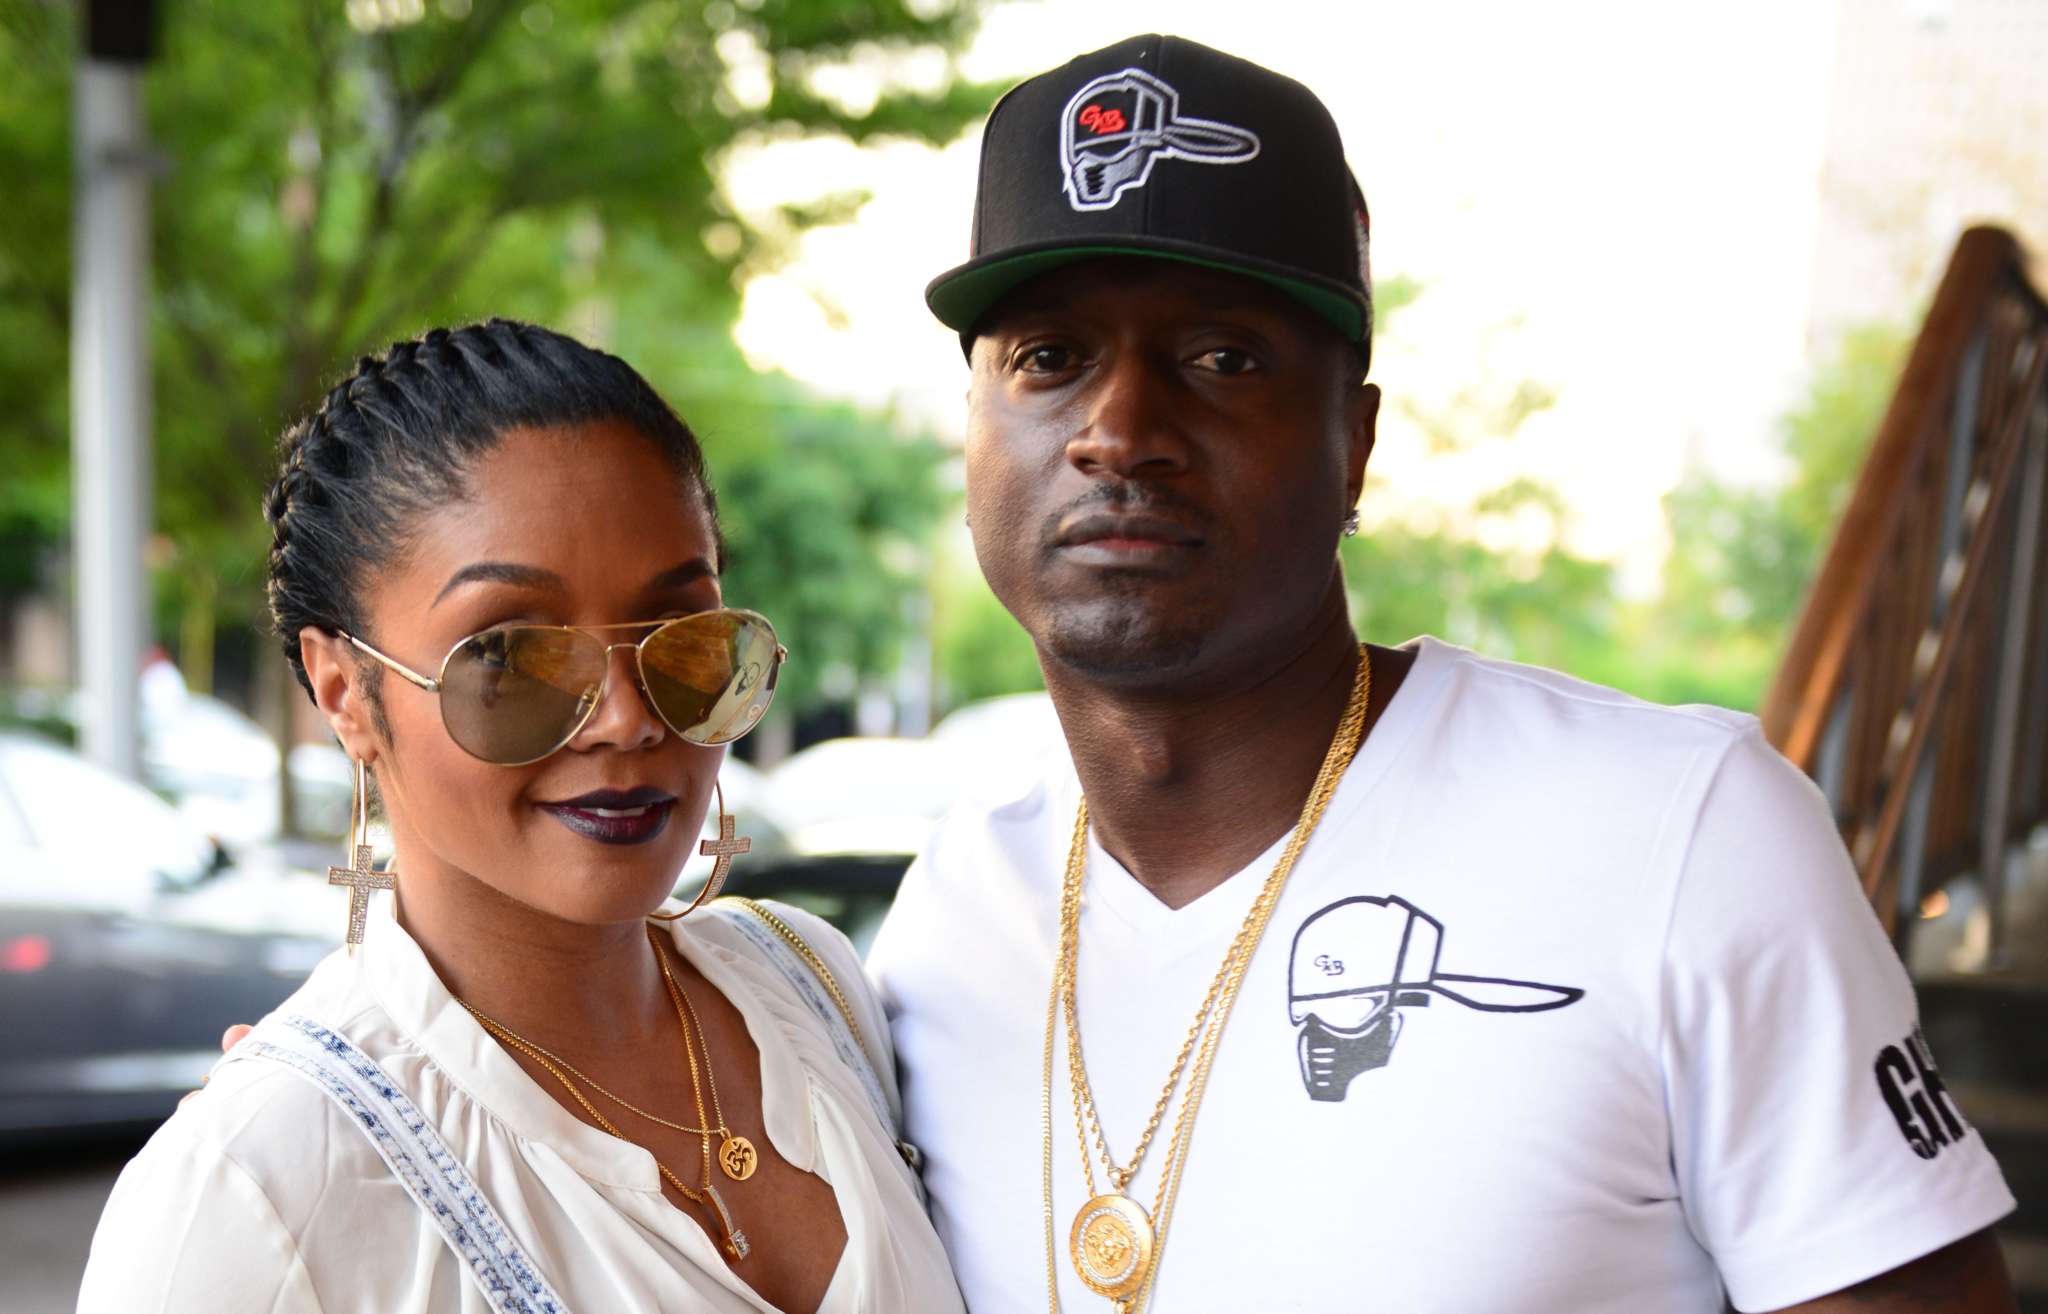 Rasheeda Frost's Husband, Kirk Frost Worries Fans With This Video - Check Him Out Riding A Harley Davidson!